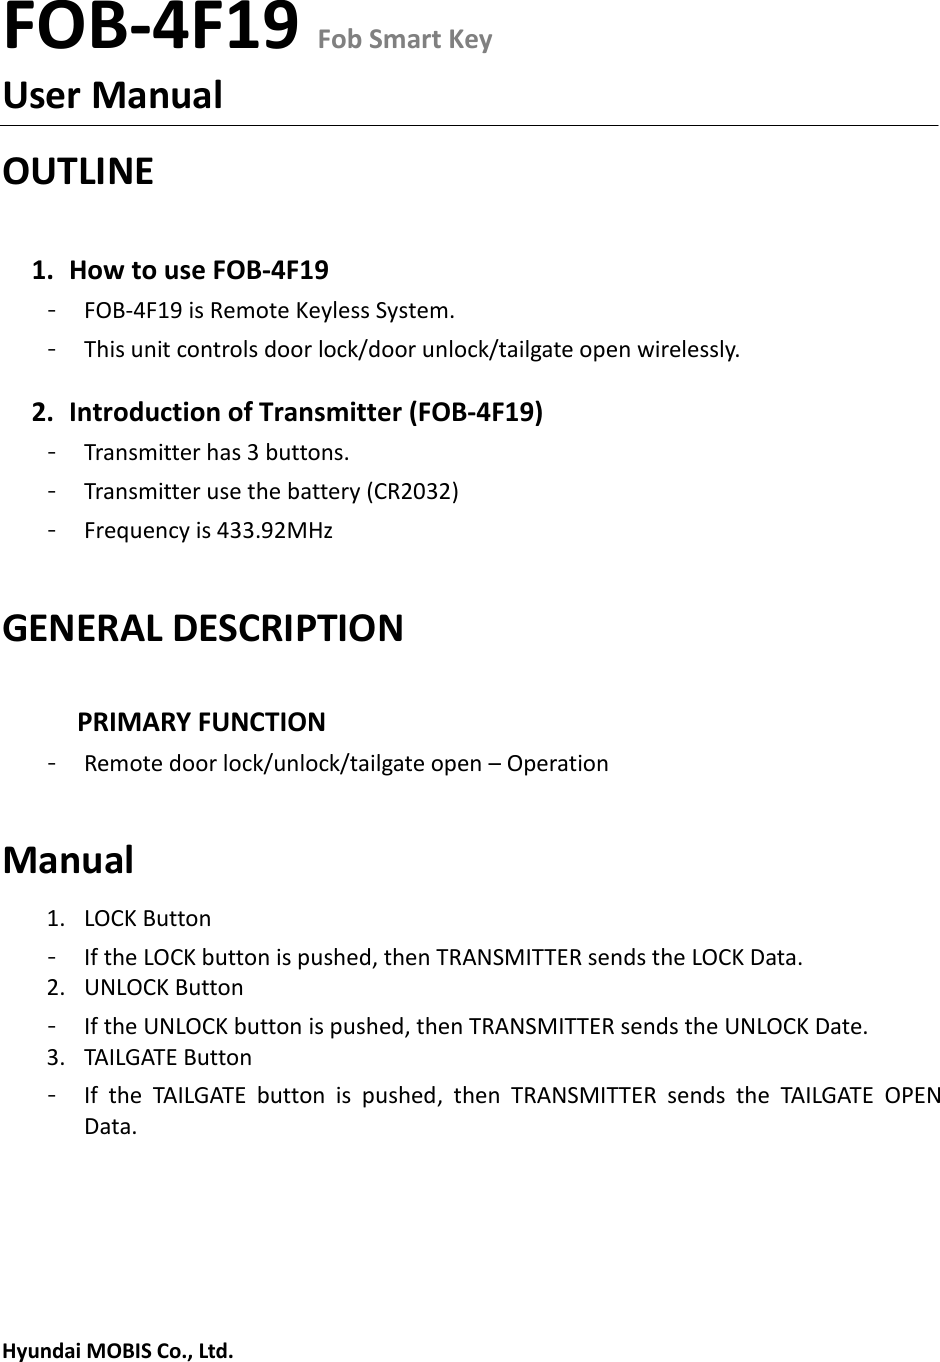 FOB-4F19 Fob Smart KeyUser Manual OUTLINE 1. How to use FOB-4F19- FOB-4F19 is Remote Keyless System.- This unit controls door lock/door unlock/tailgate open wirelessly. 2. Introduction of Transmitter (FOB-4F19)- Transmitter has 3 buttons. - Transmitter use the battery (CR2032) - Frequency is 433.92MHz GENERAL DESCRIPTION PRIMARY FUNCTION - Remote door lock/unlock/tailgate open – Operation Manual 1. LOCK Button- If the LOCK button is pushed, then TRANSMITTER sends the LOCK Data. 2. UNLOCK Button- If the UNLOCK button is pushed, then TRANSMITTER sends the UNLOCK Date. 3. TAILGATE Button- If  the  TAILGATE  button  is  pushed,  then  TRANSMITTER  sends  the  TAILGATE  OPEN Data. Hyundai MOBIS Co., Ltd. 